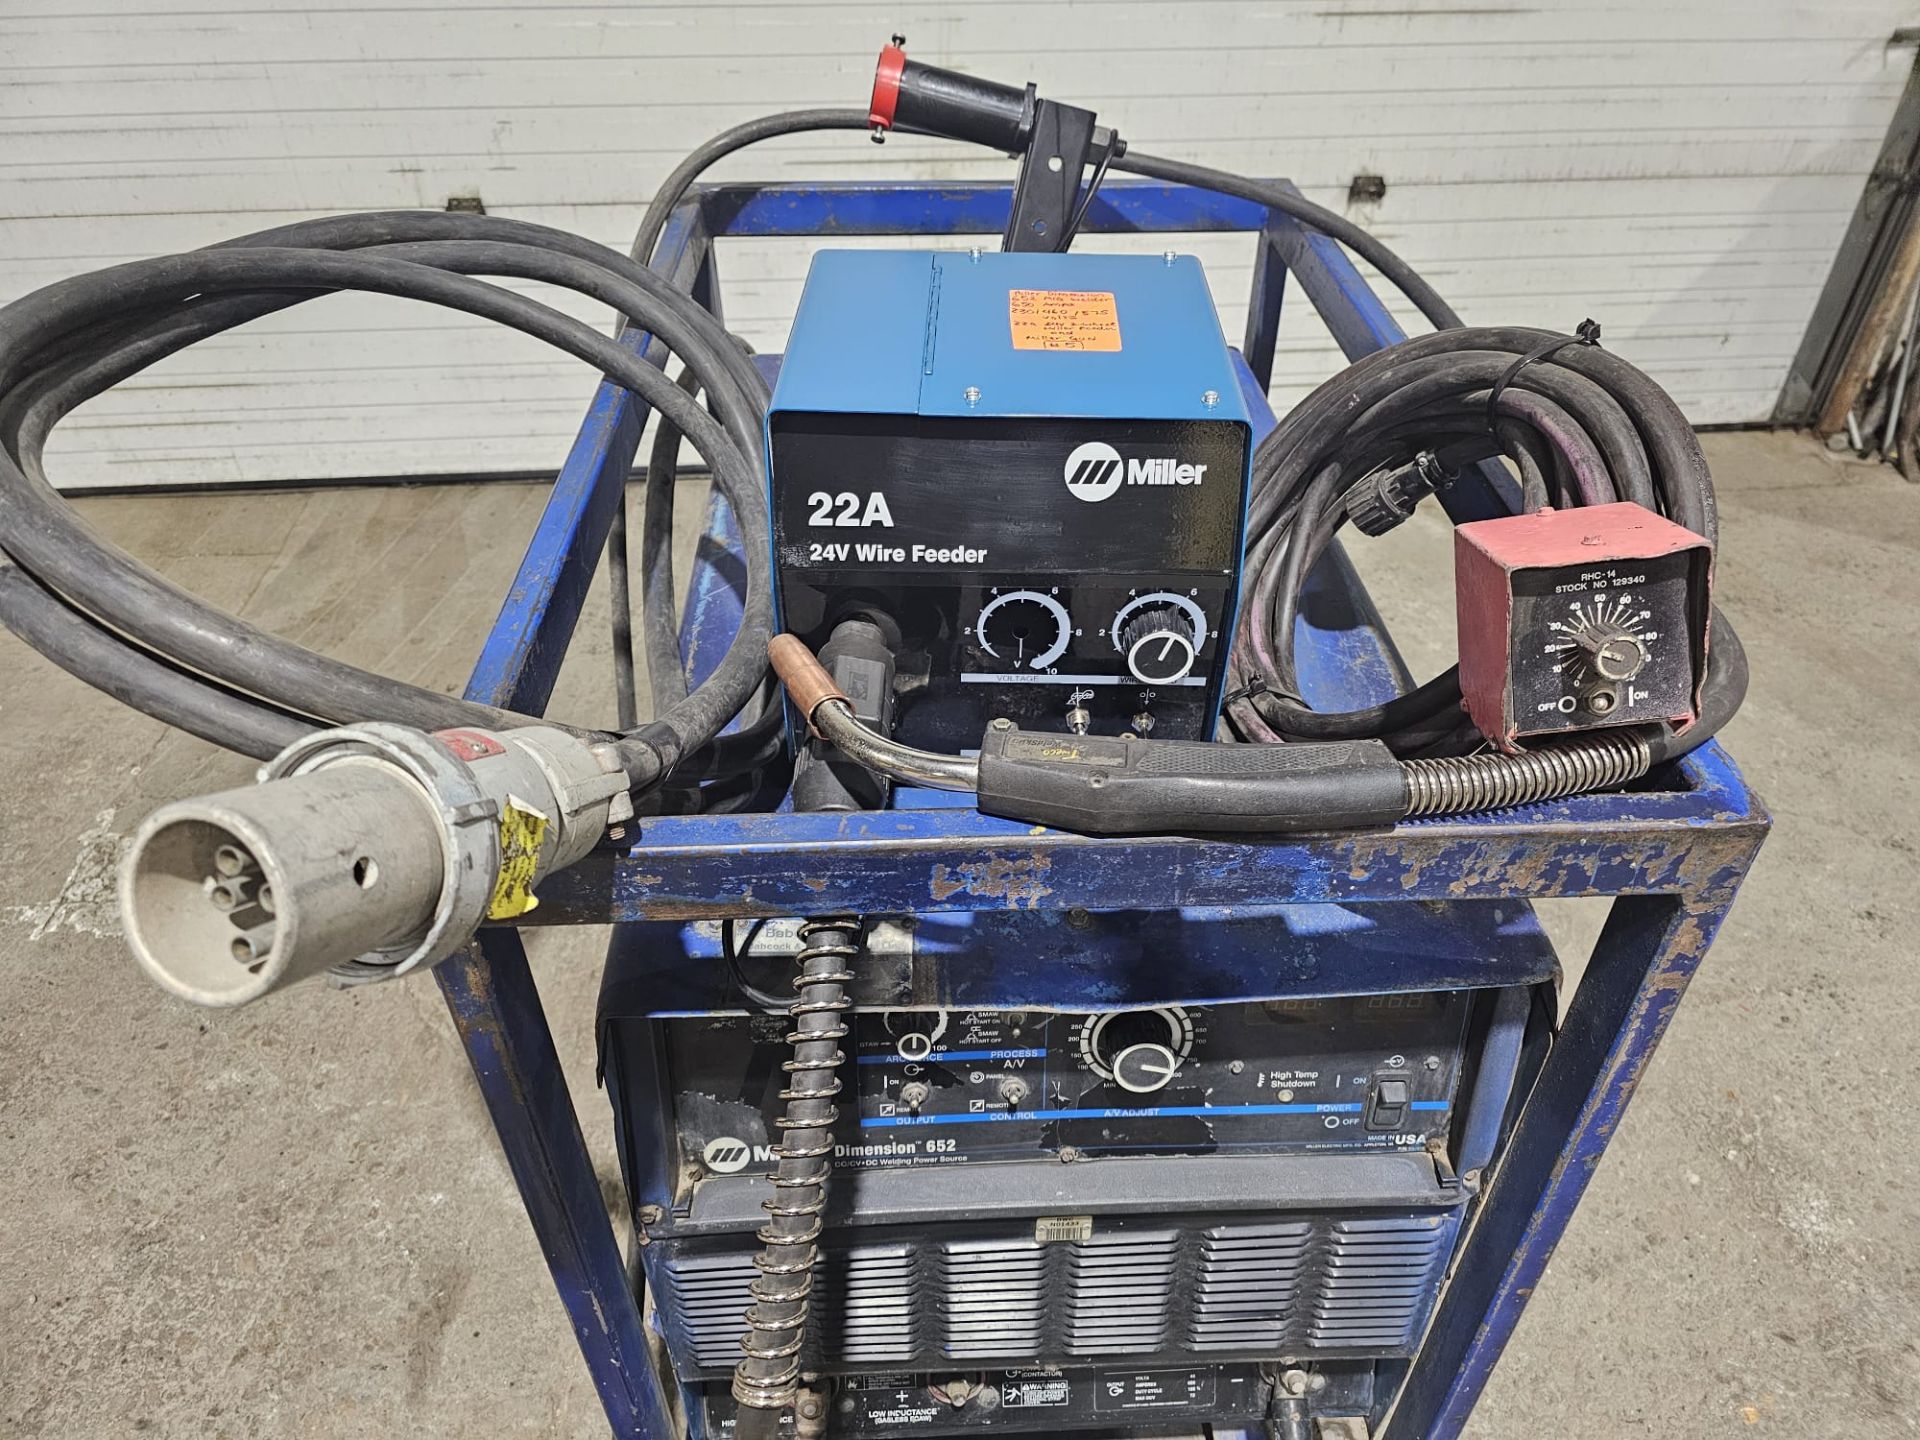 Miller Dimension 652 Mig Welder 650 Amp Mig Tig Stick Multi Process Power Source with 22A Wire - Image 7 of 9